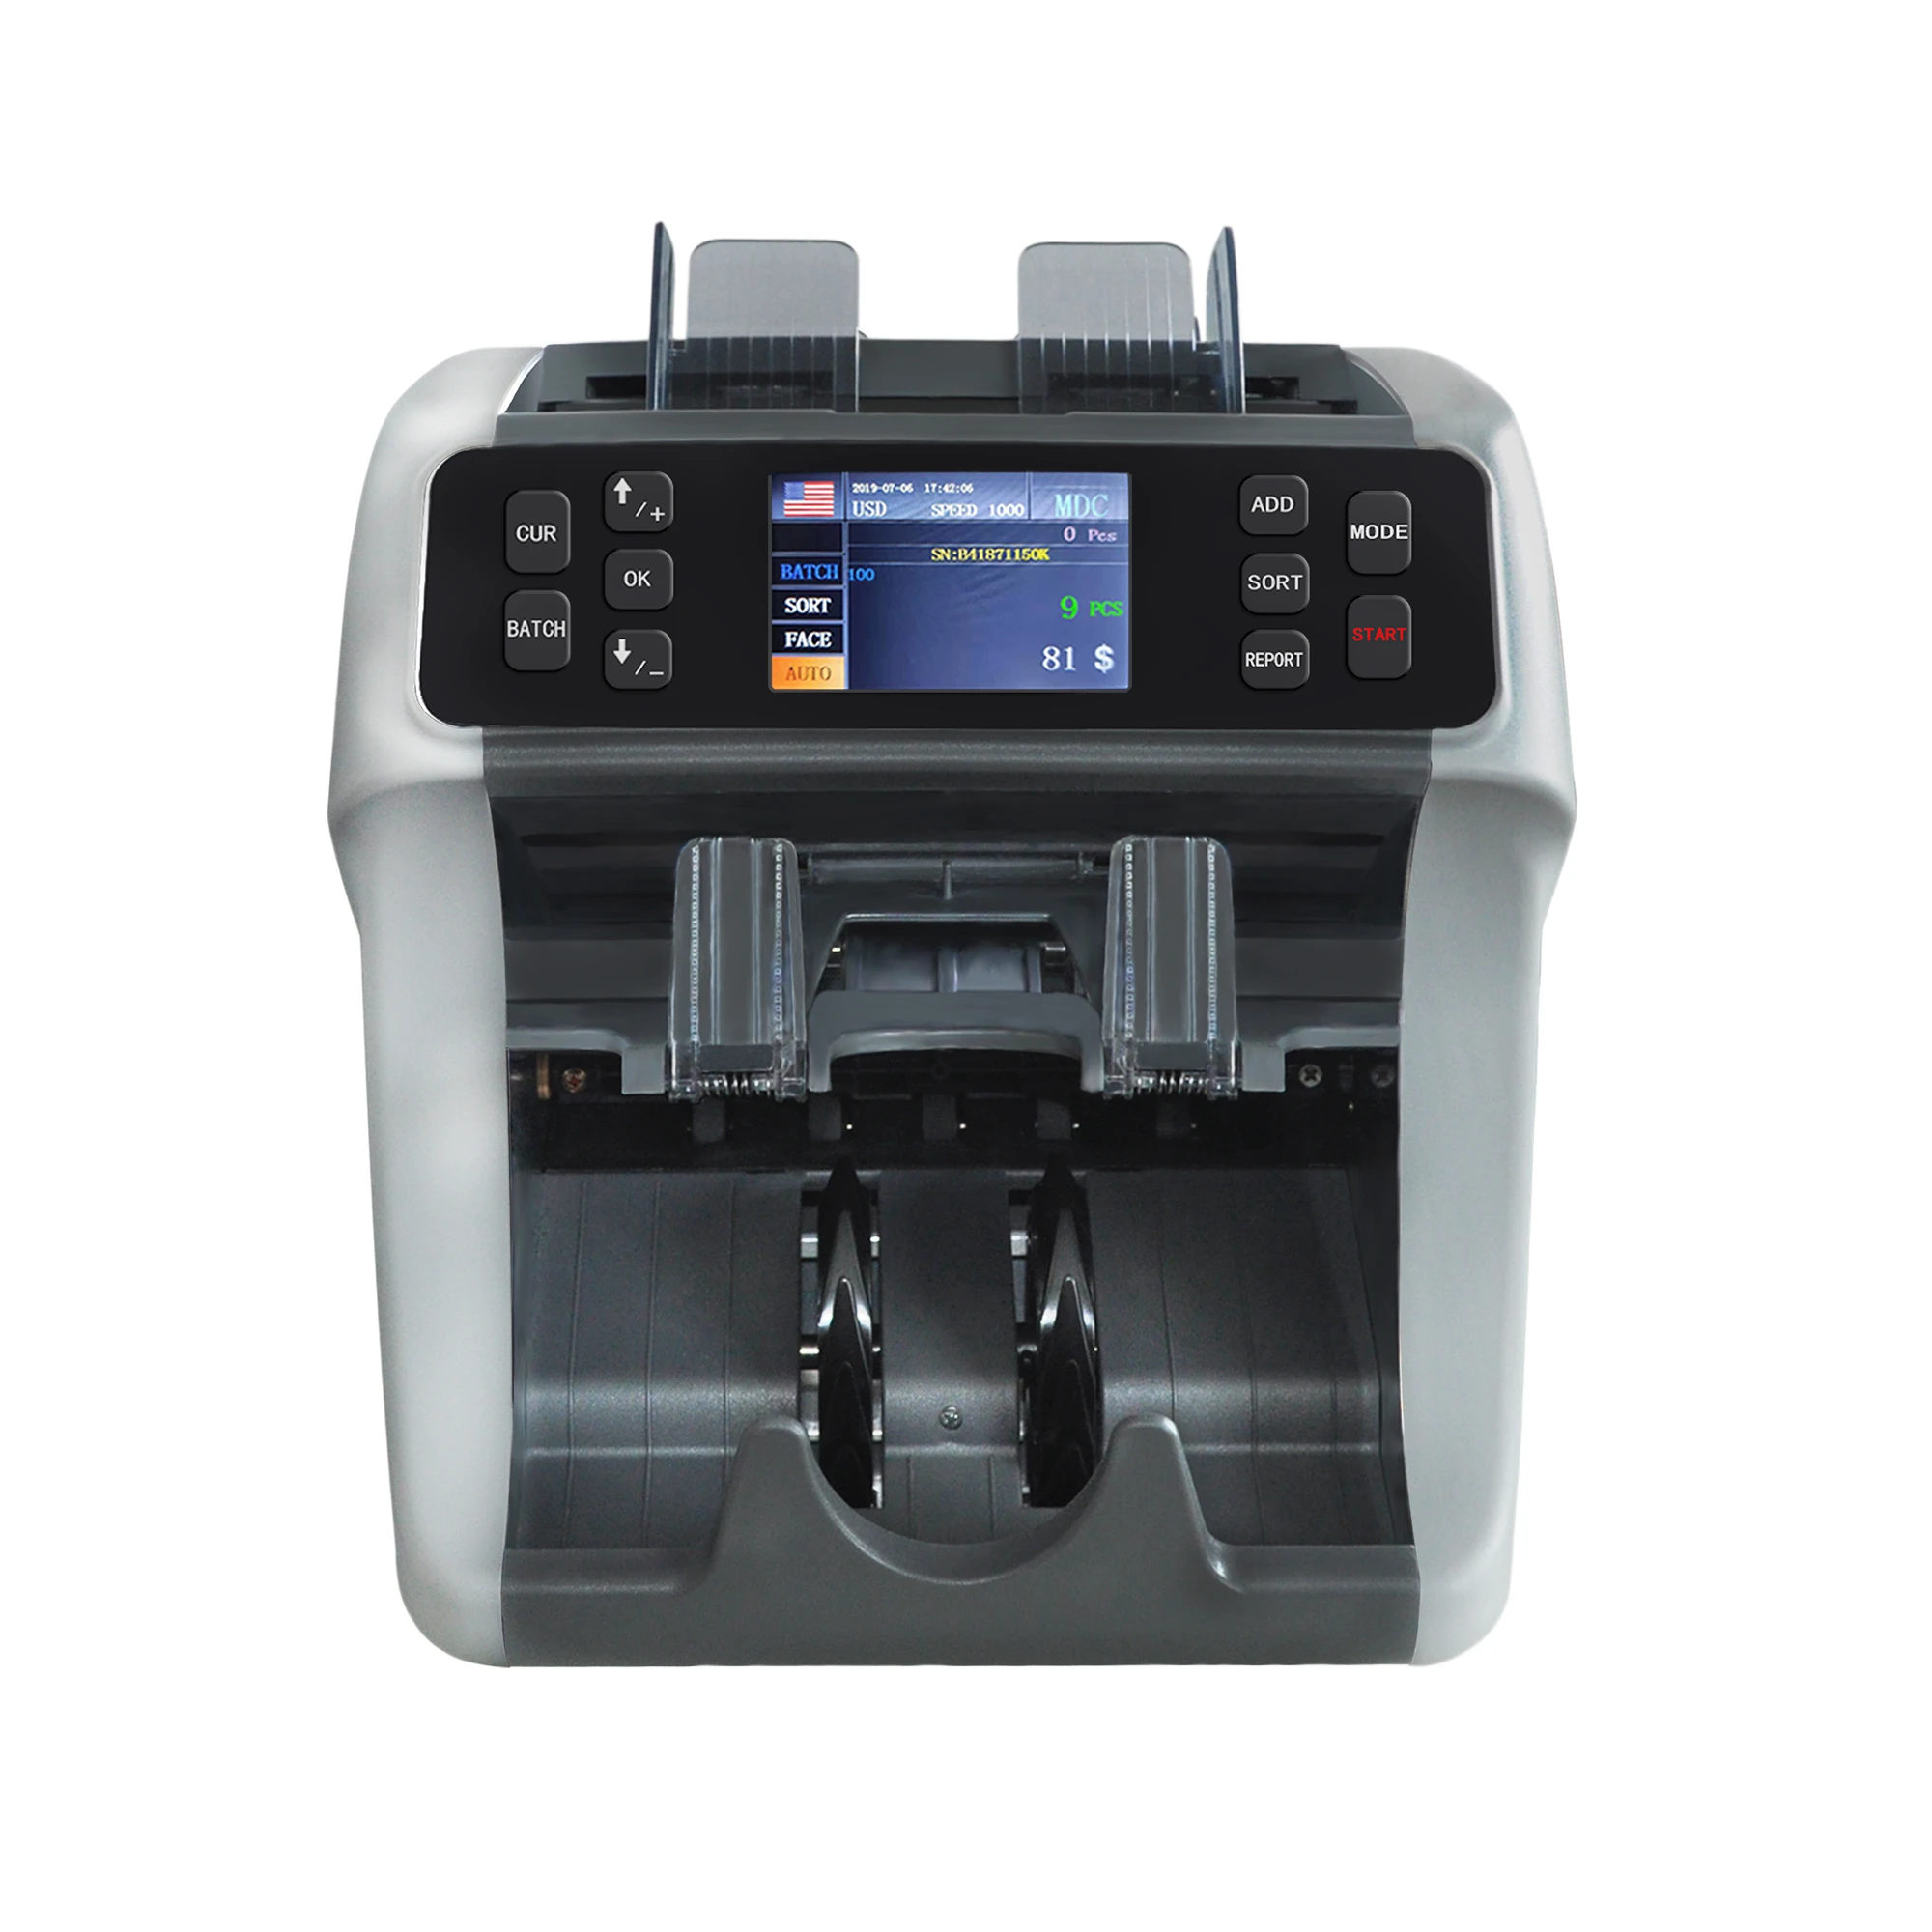 professional multi pocket banknote counter financial equipment